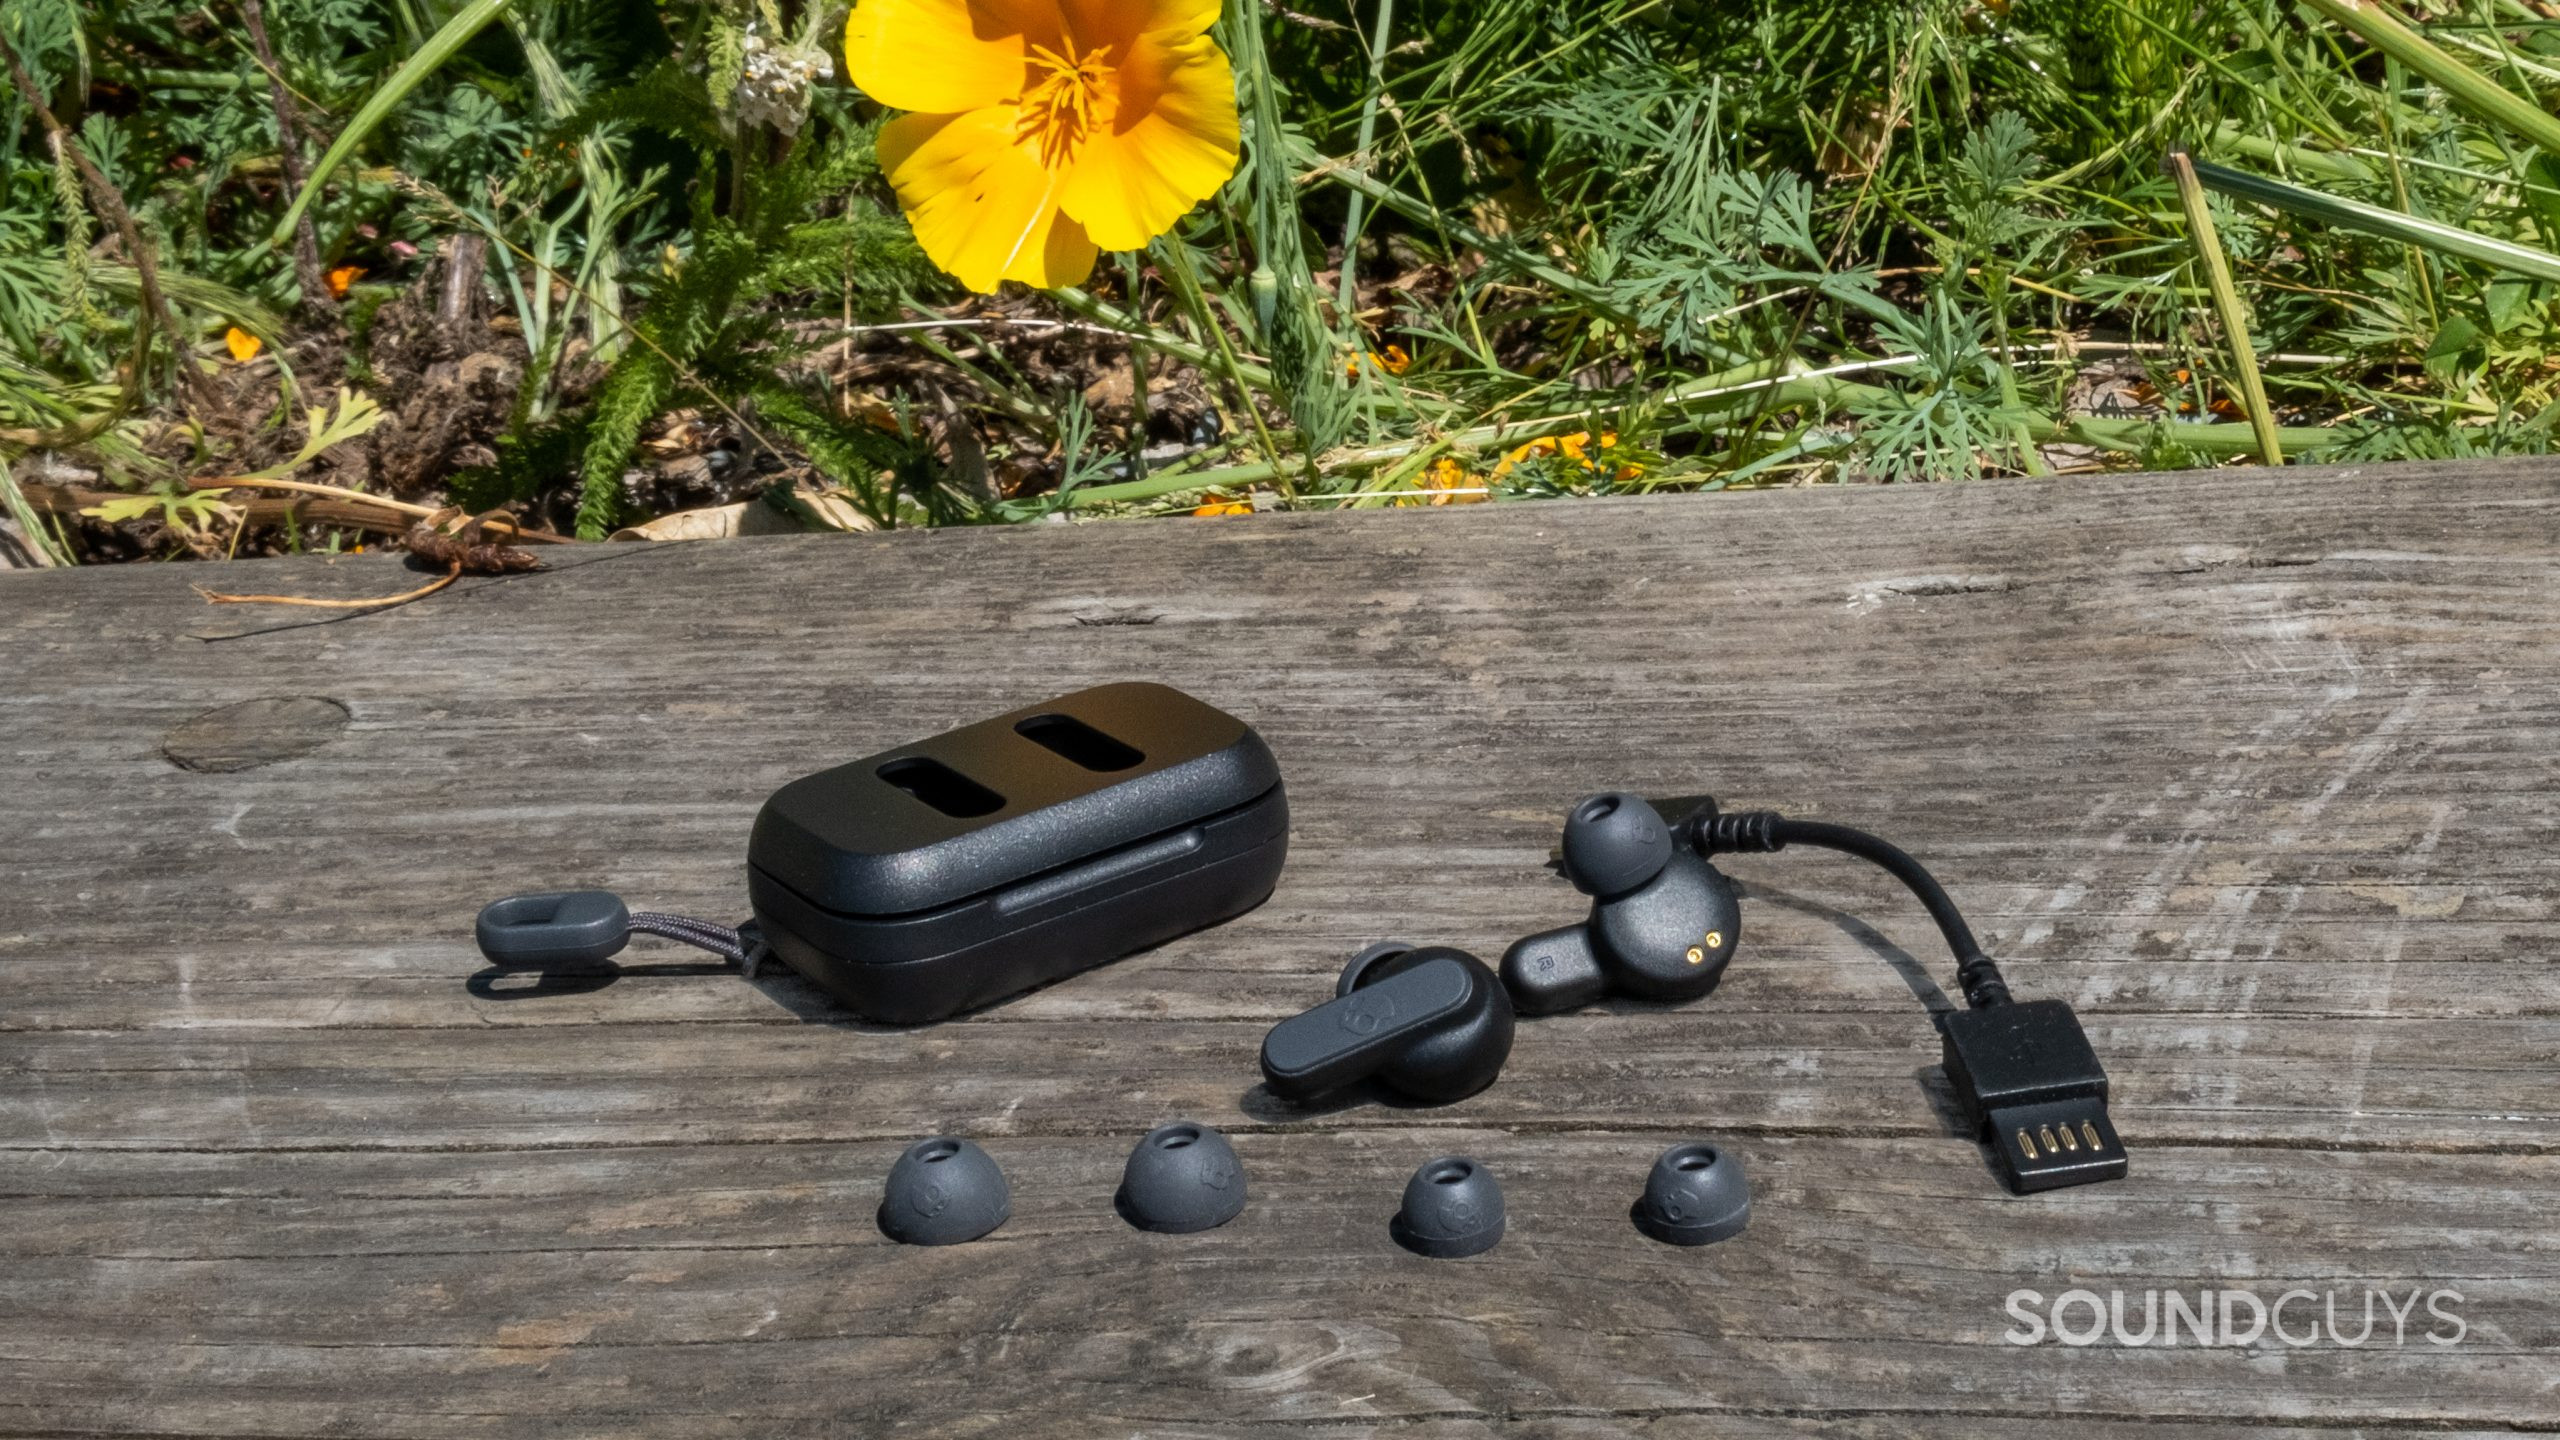 On a wood surface with grass and flowers in the background, the Skullcandy Dime 2 is spread out showing its included accessories.